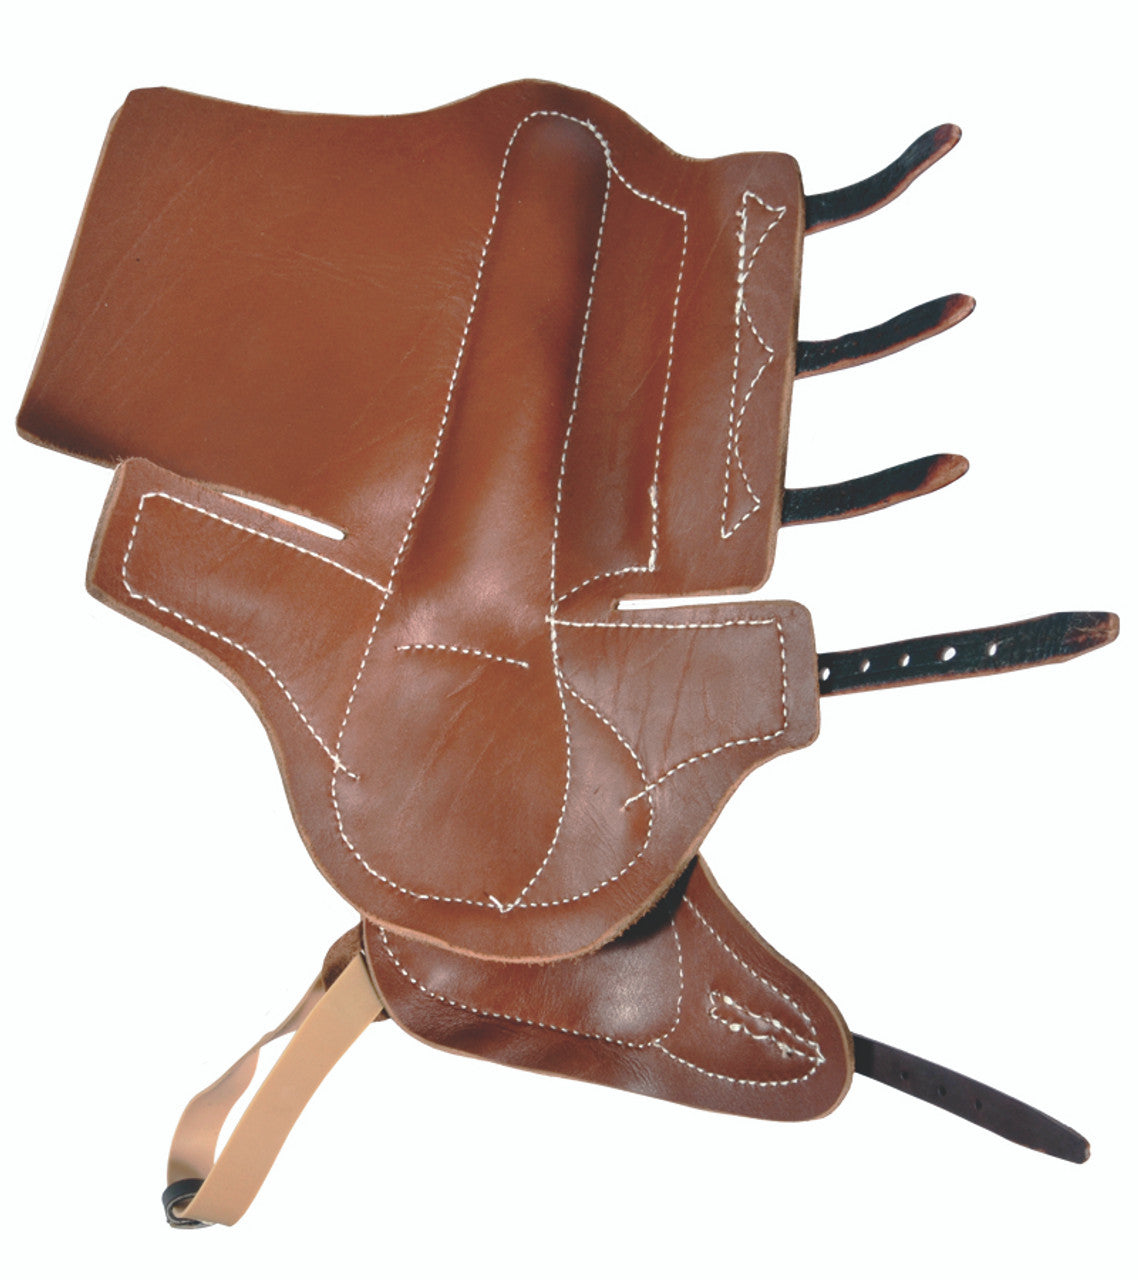 Feather-Weight Hind Shin & Ankle Boots with Speedy Cut-TexanSaddles.com